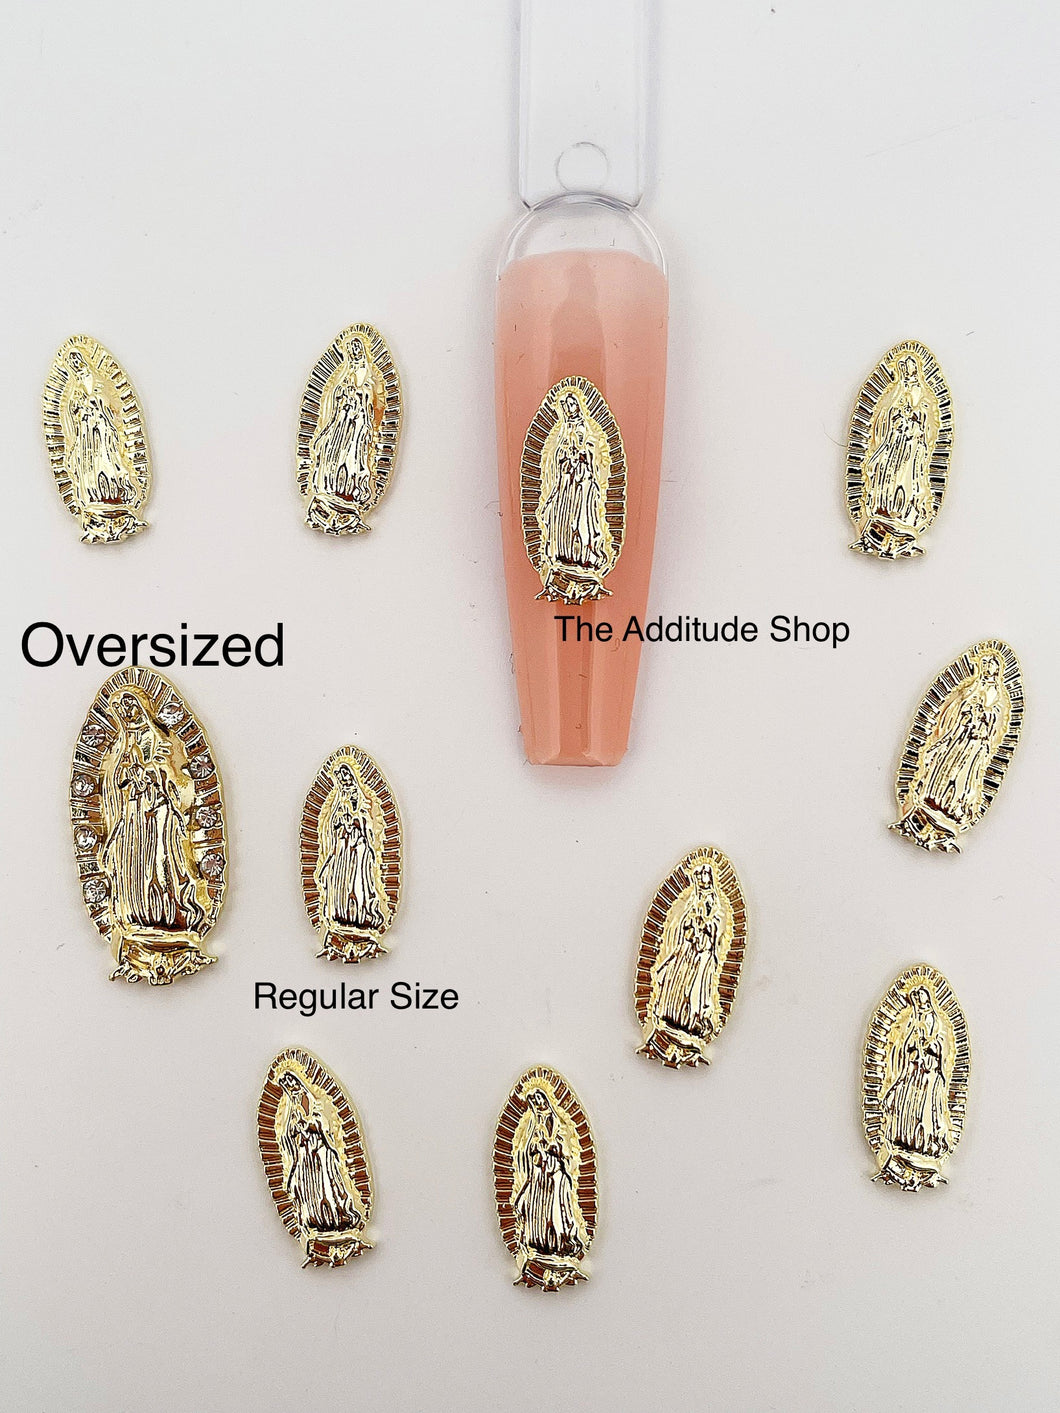 Regular Size Virgin Mary Alloy Nail 3D Charms-10 Pieces – The